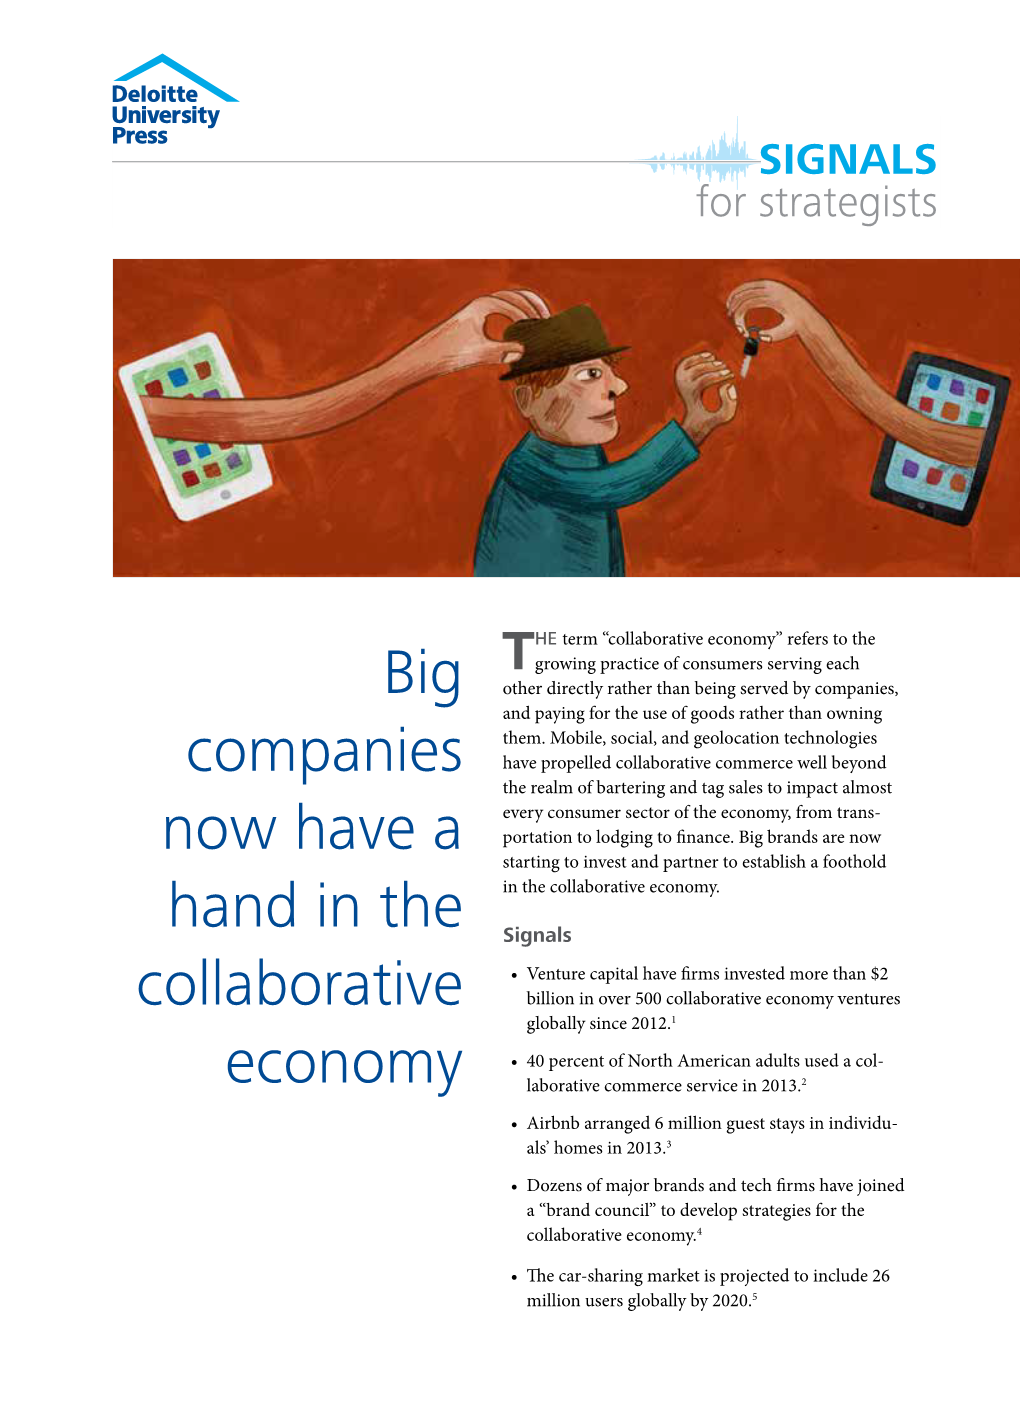 Big Companies Now Have a Hand in the Collaborative Economy Signals for Strategists